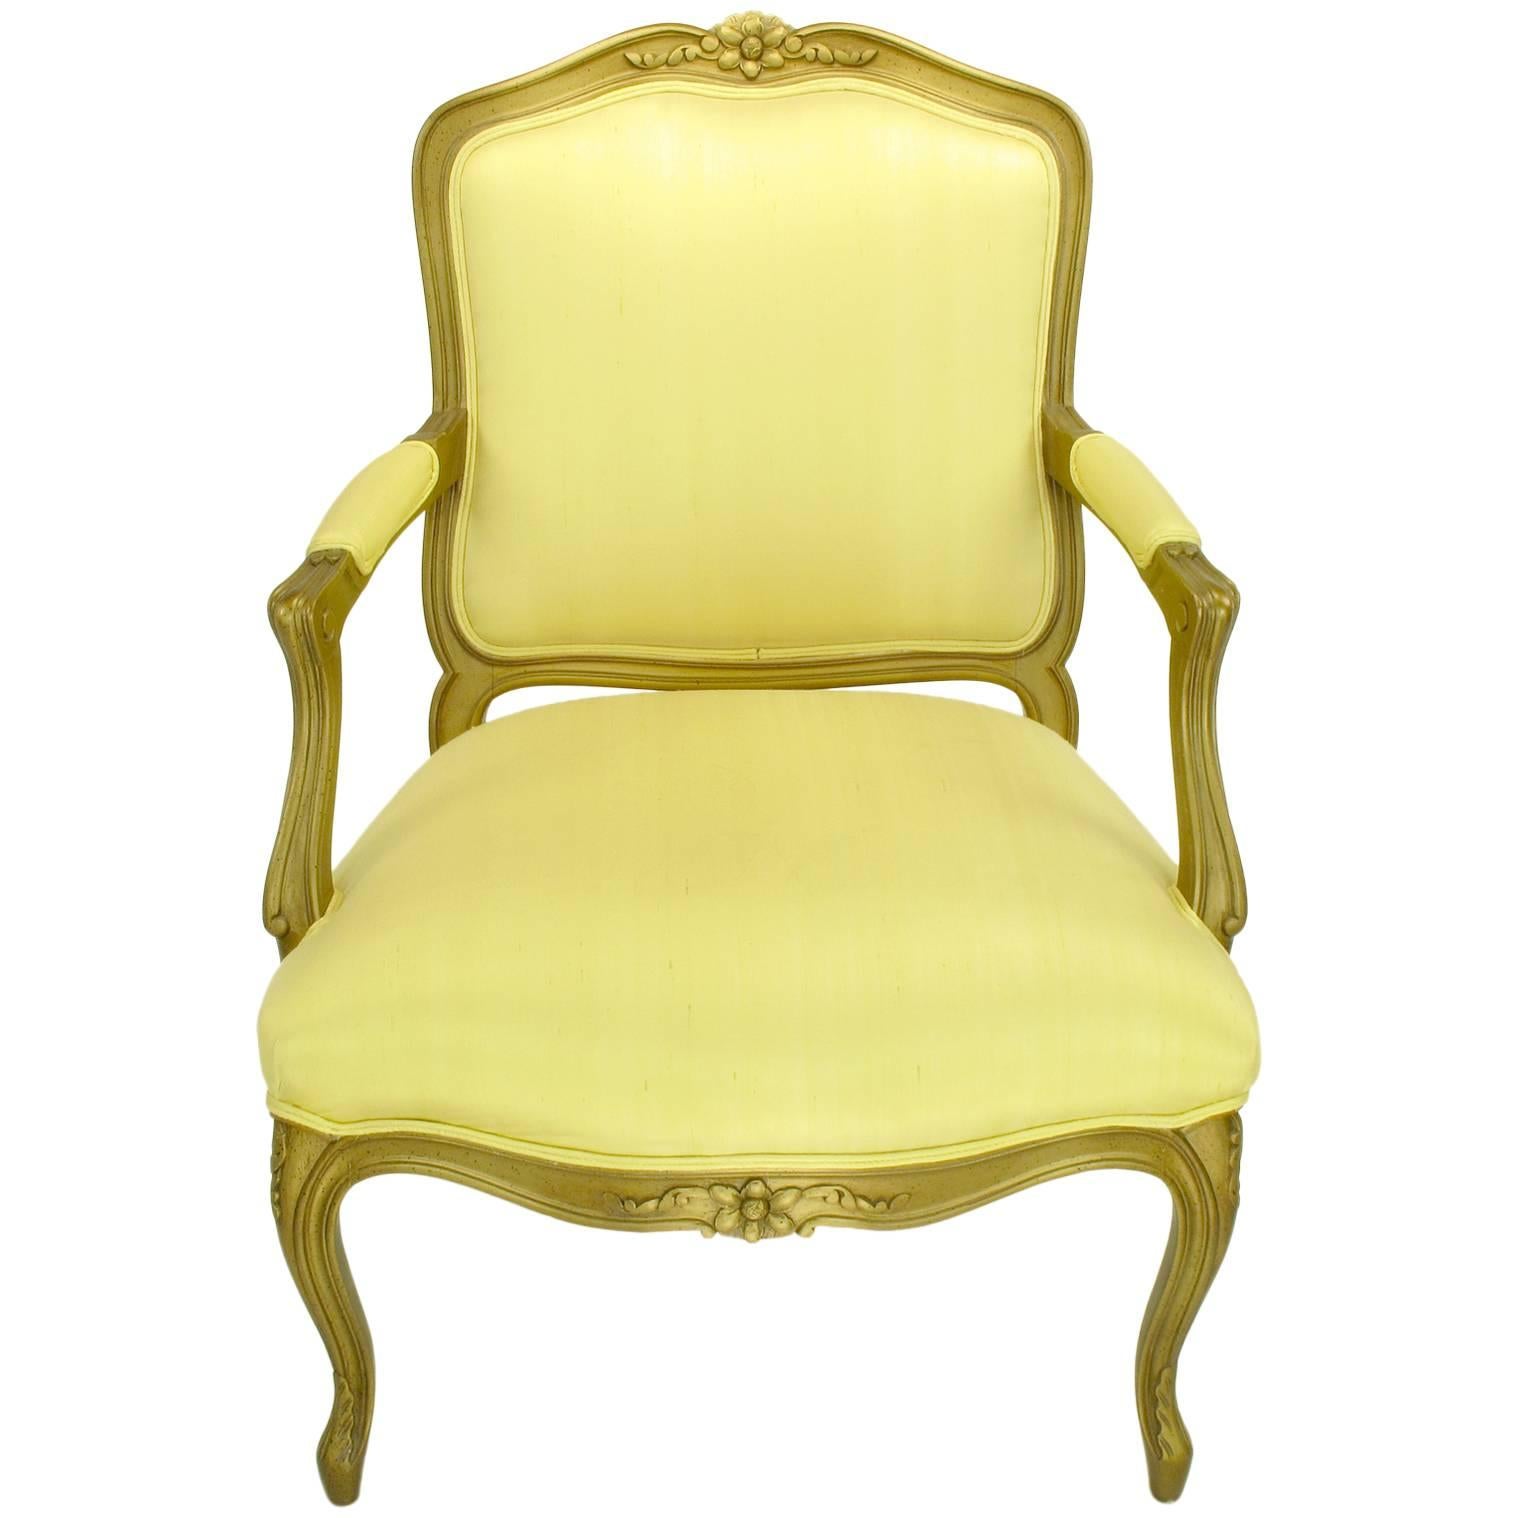 1940s Giltwood Louis XV Style Fauteuil with Saffron Silk Upholstery